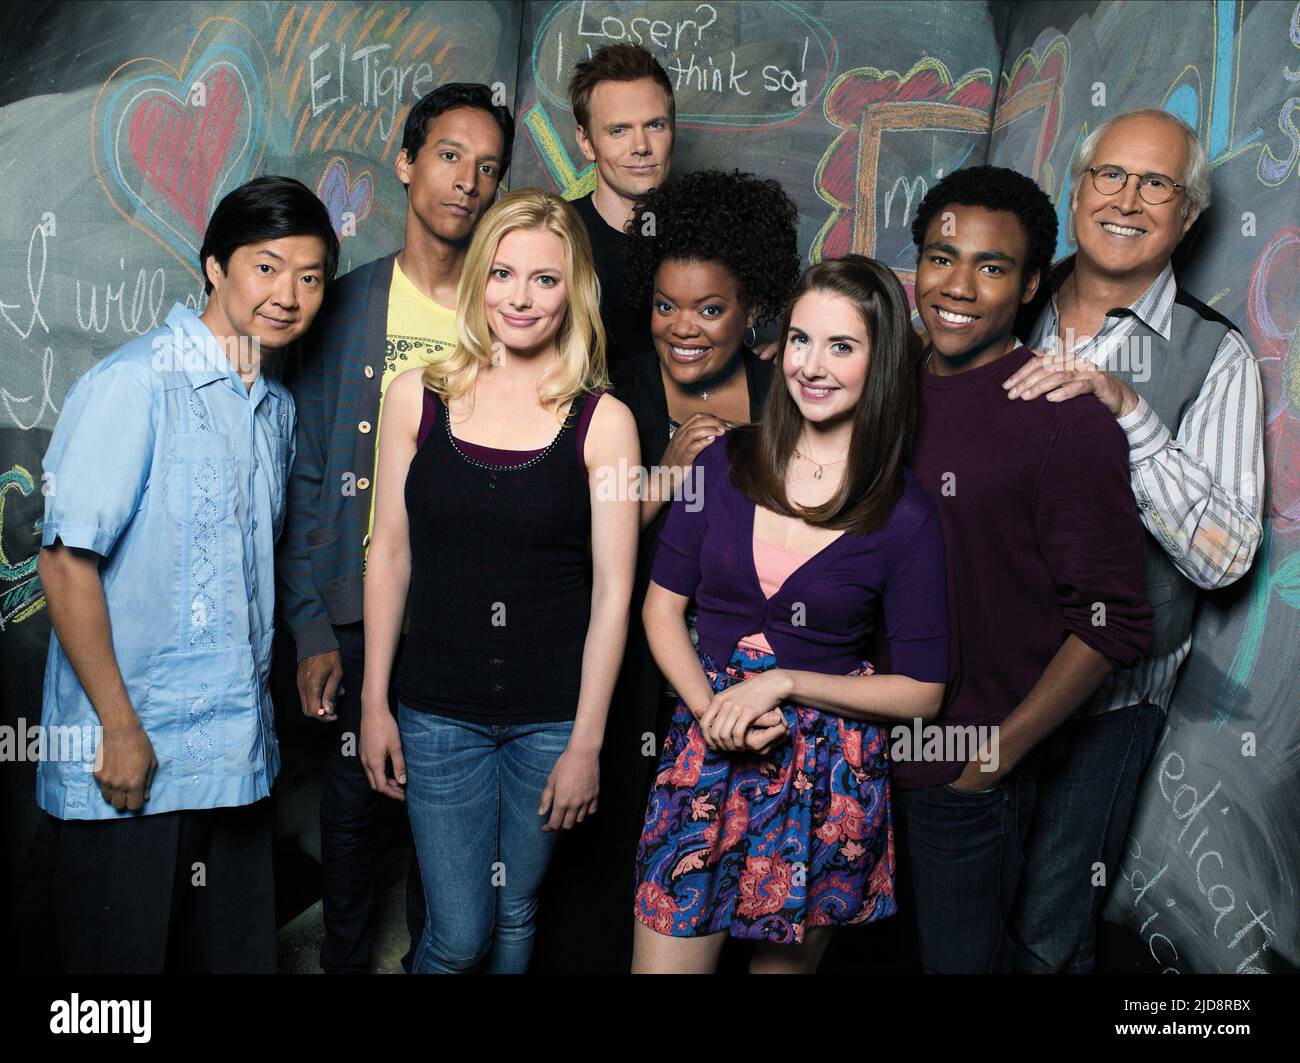 JEONG,PUDI,JACOBS,MCHALE,MARRONE,BRIE,GLOVER,CHASE, COMMUNITY, 2009, Foto Stock